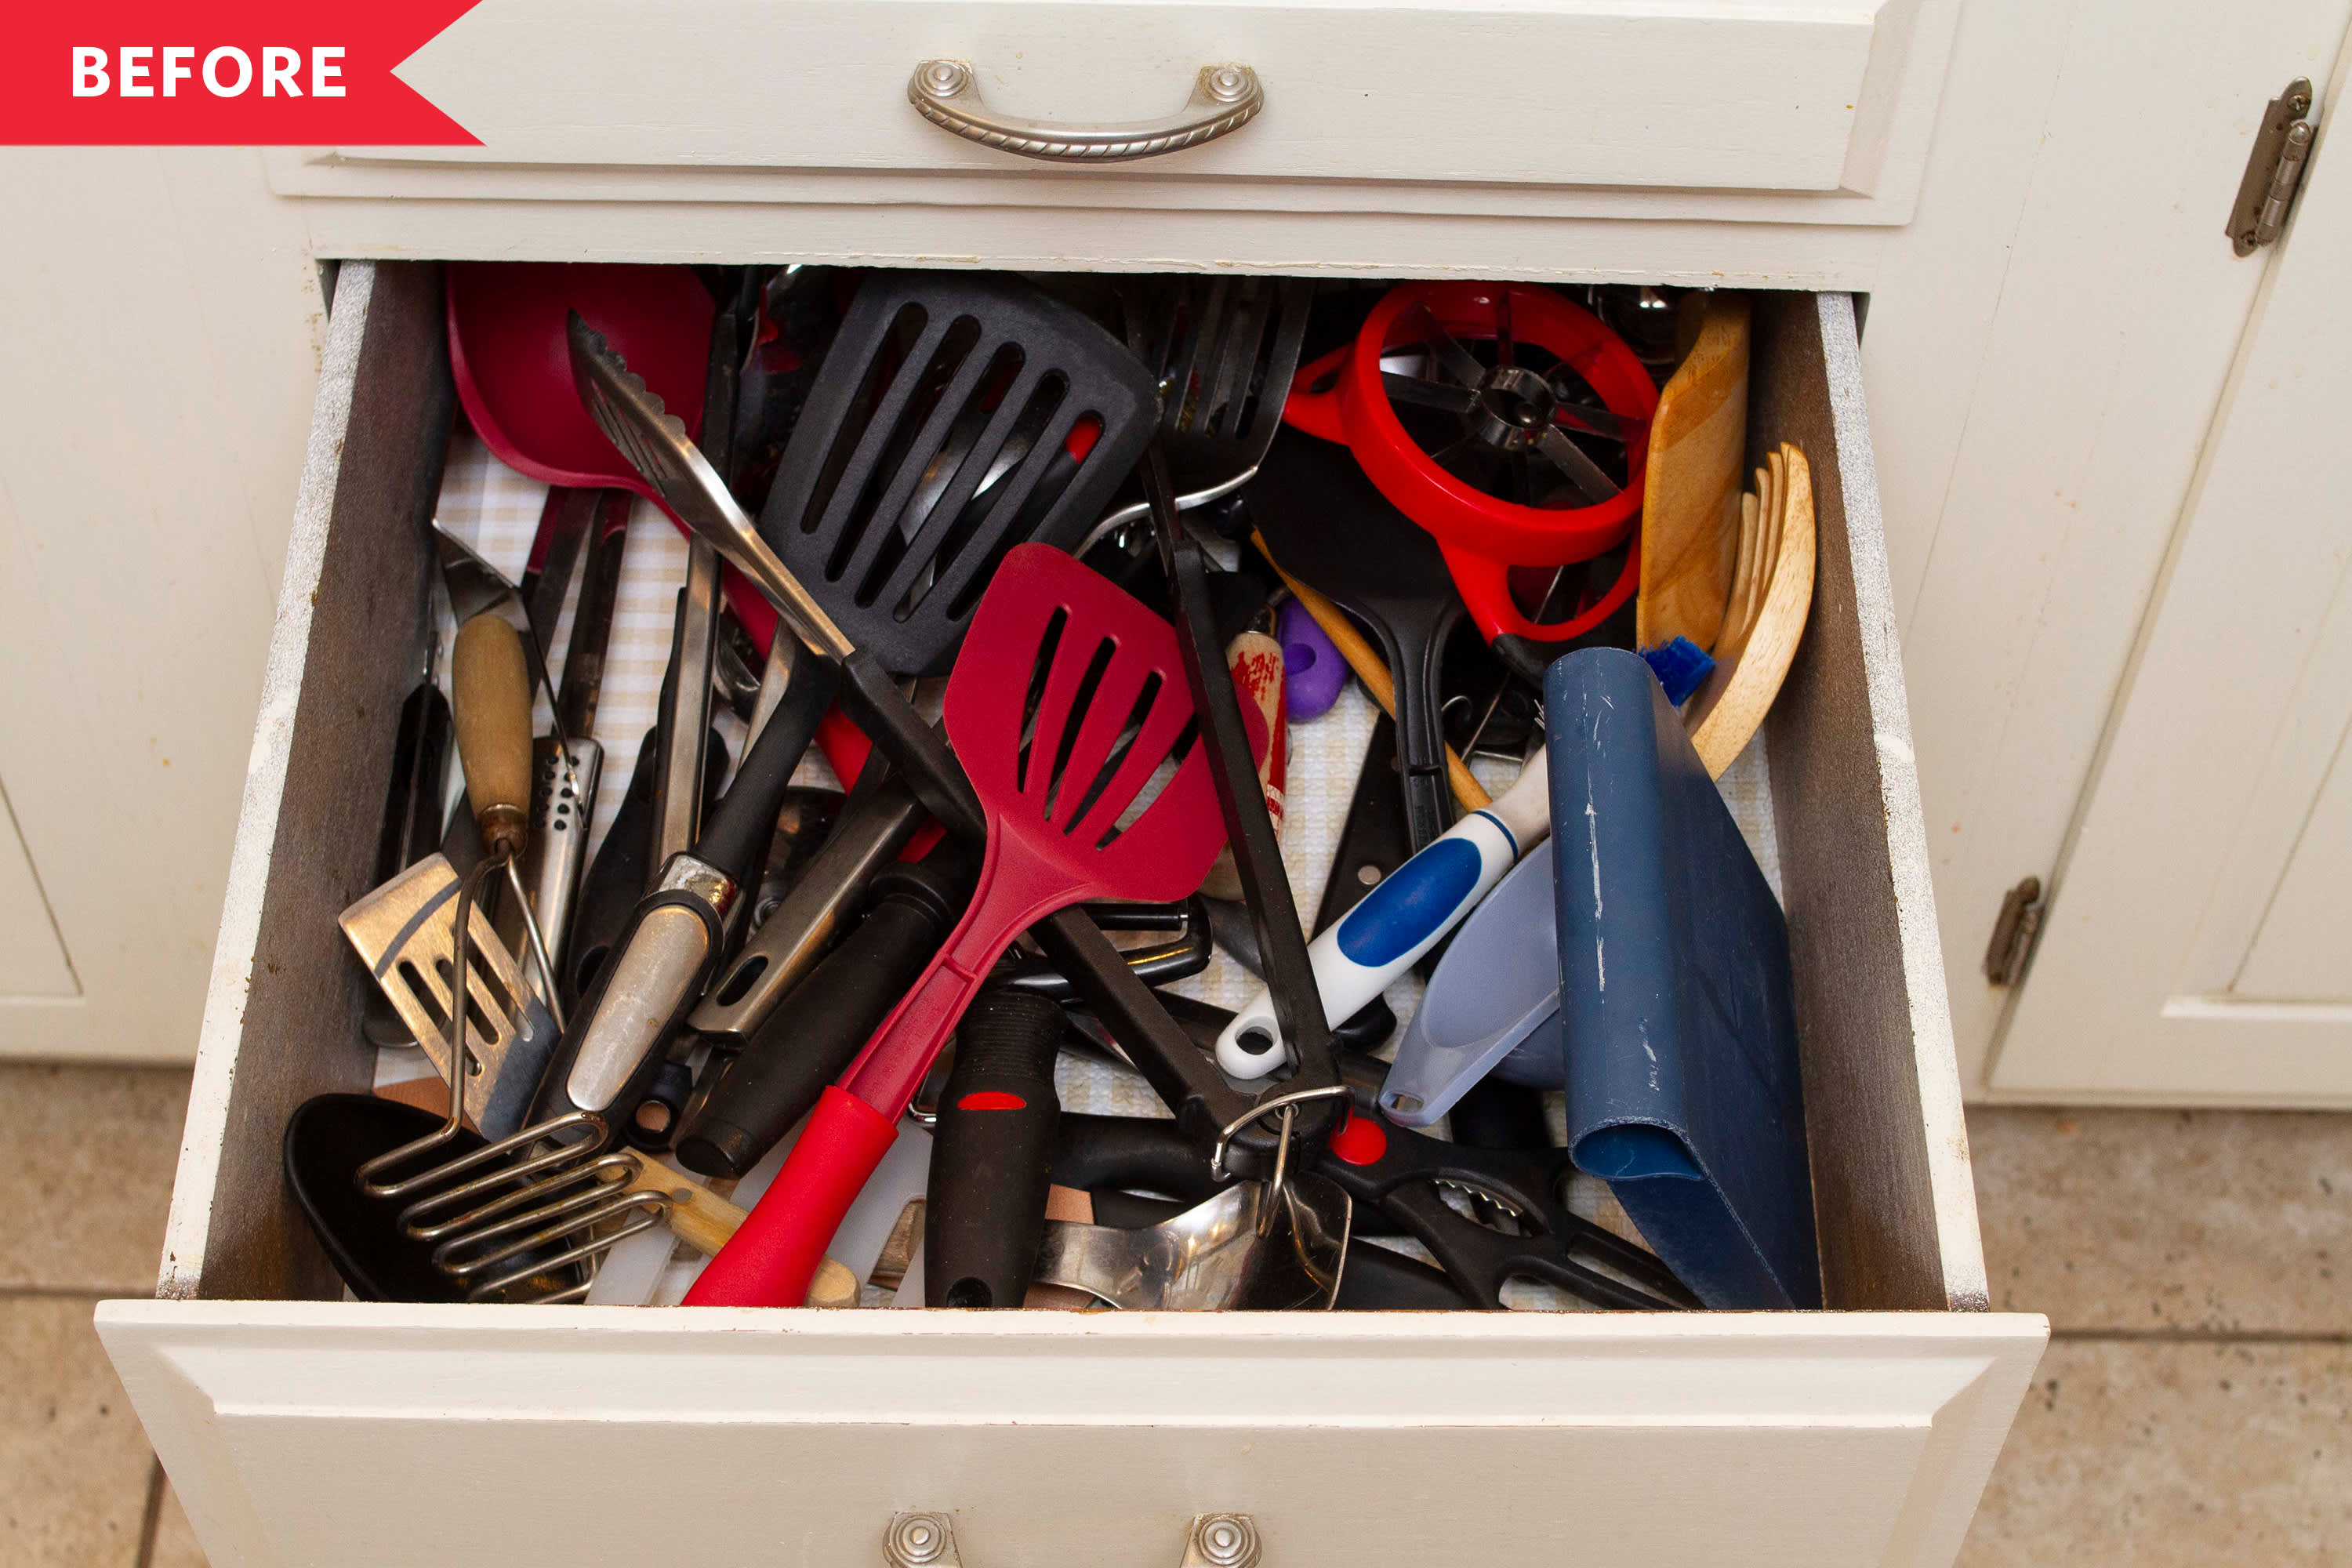 15 Easy (and Pretty) Ways to Organize Utensils